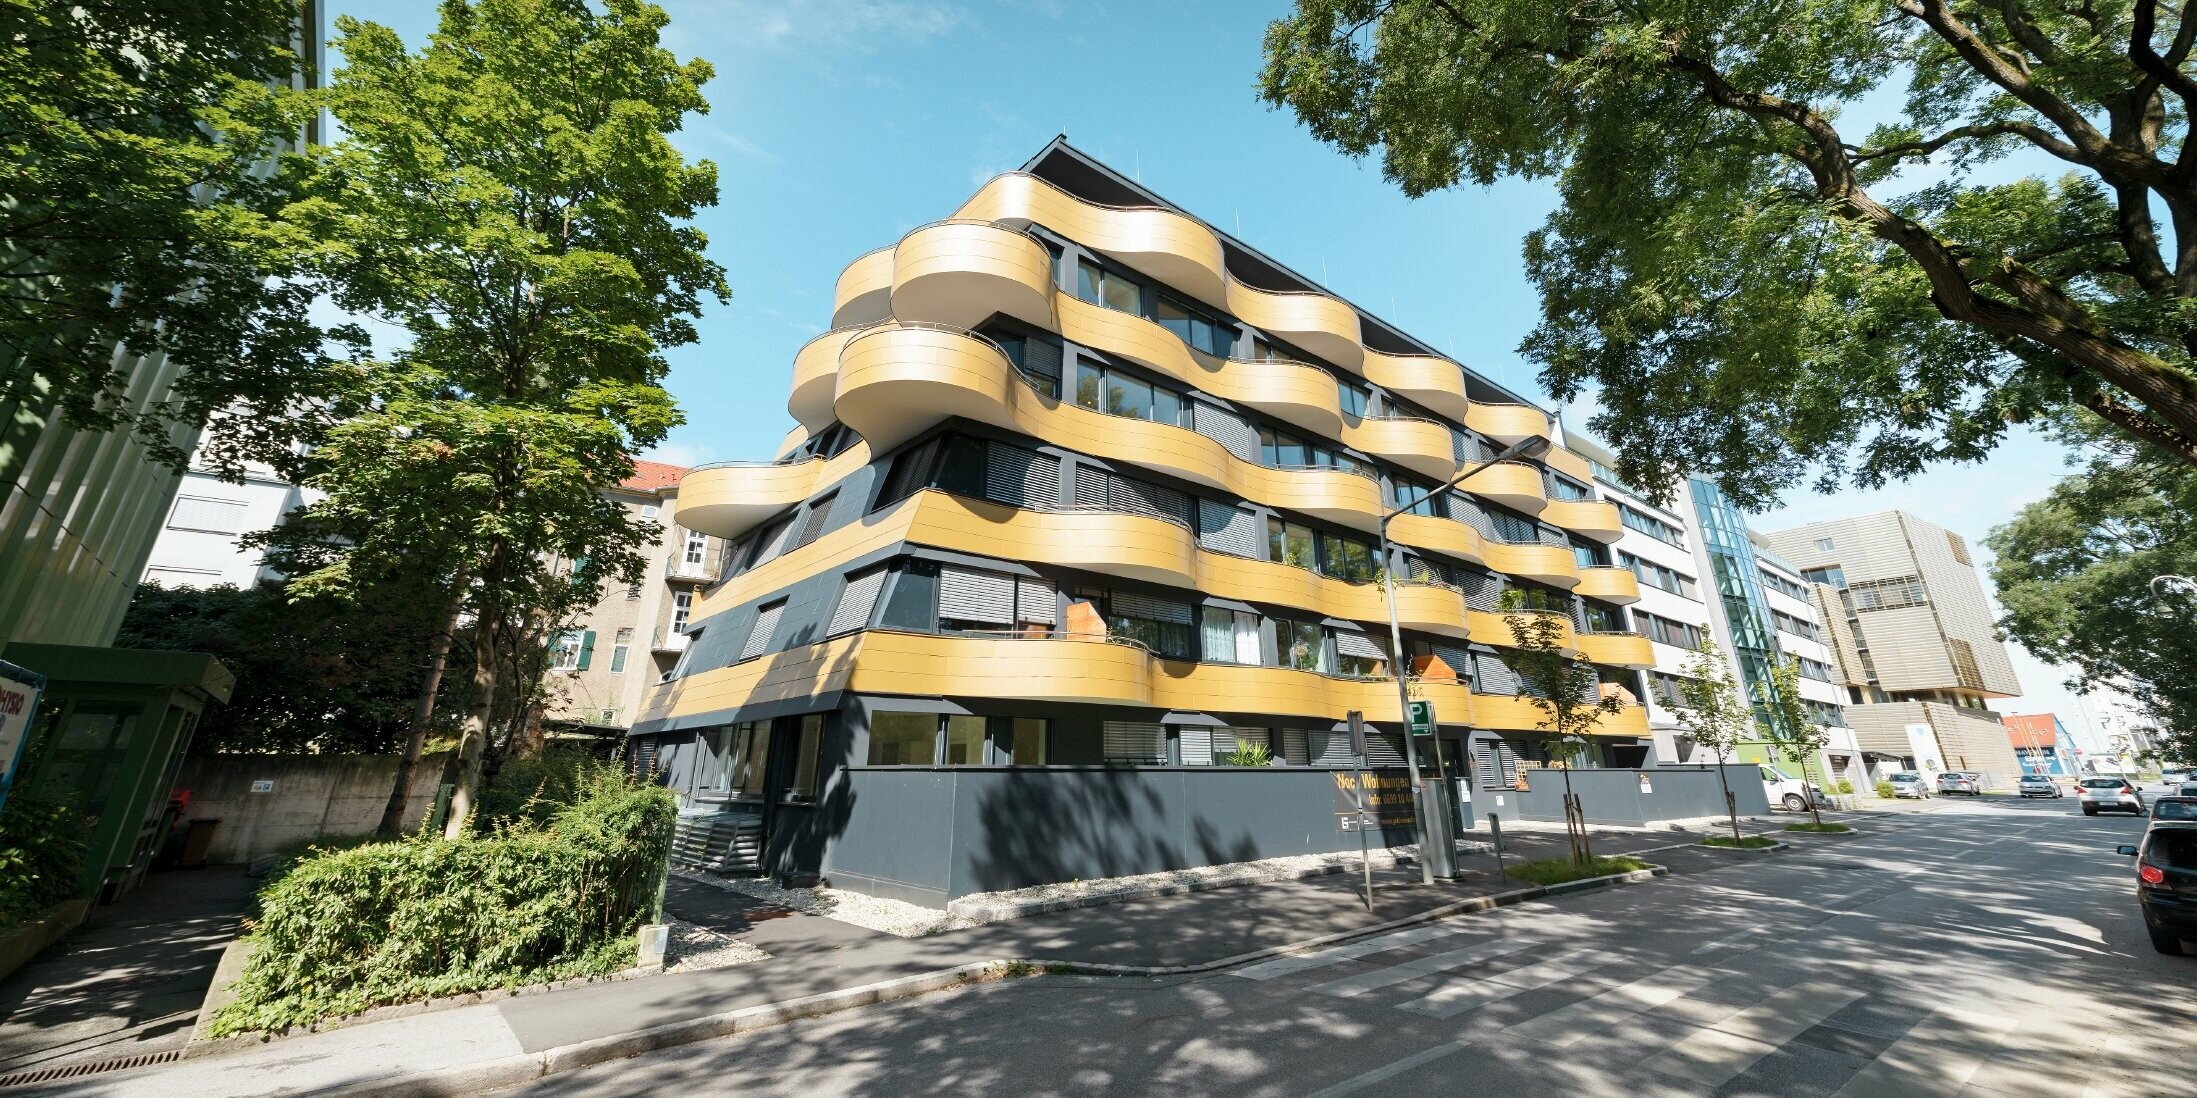 “Goldene Welle” (Golden Wave) apartment complex in Graz, Austria, with aluminum composite panels in gold, the balconies were rounded in waves 